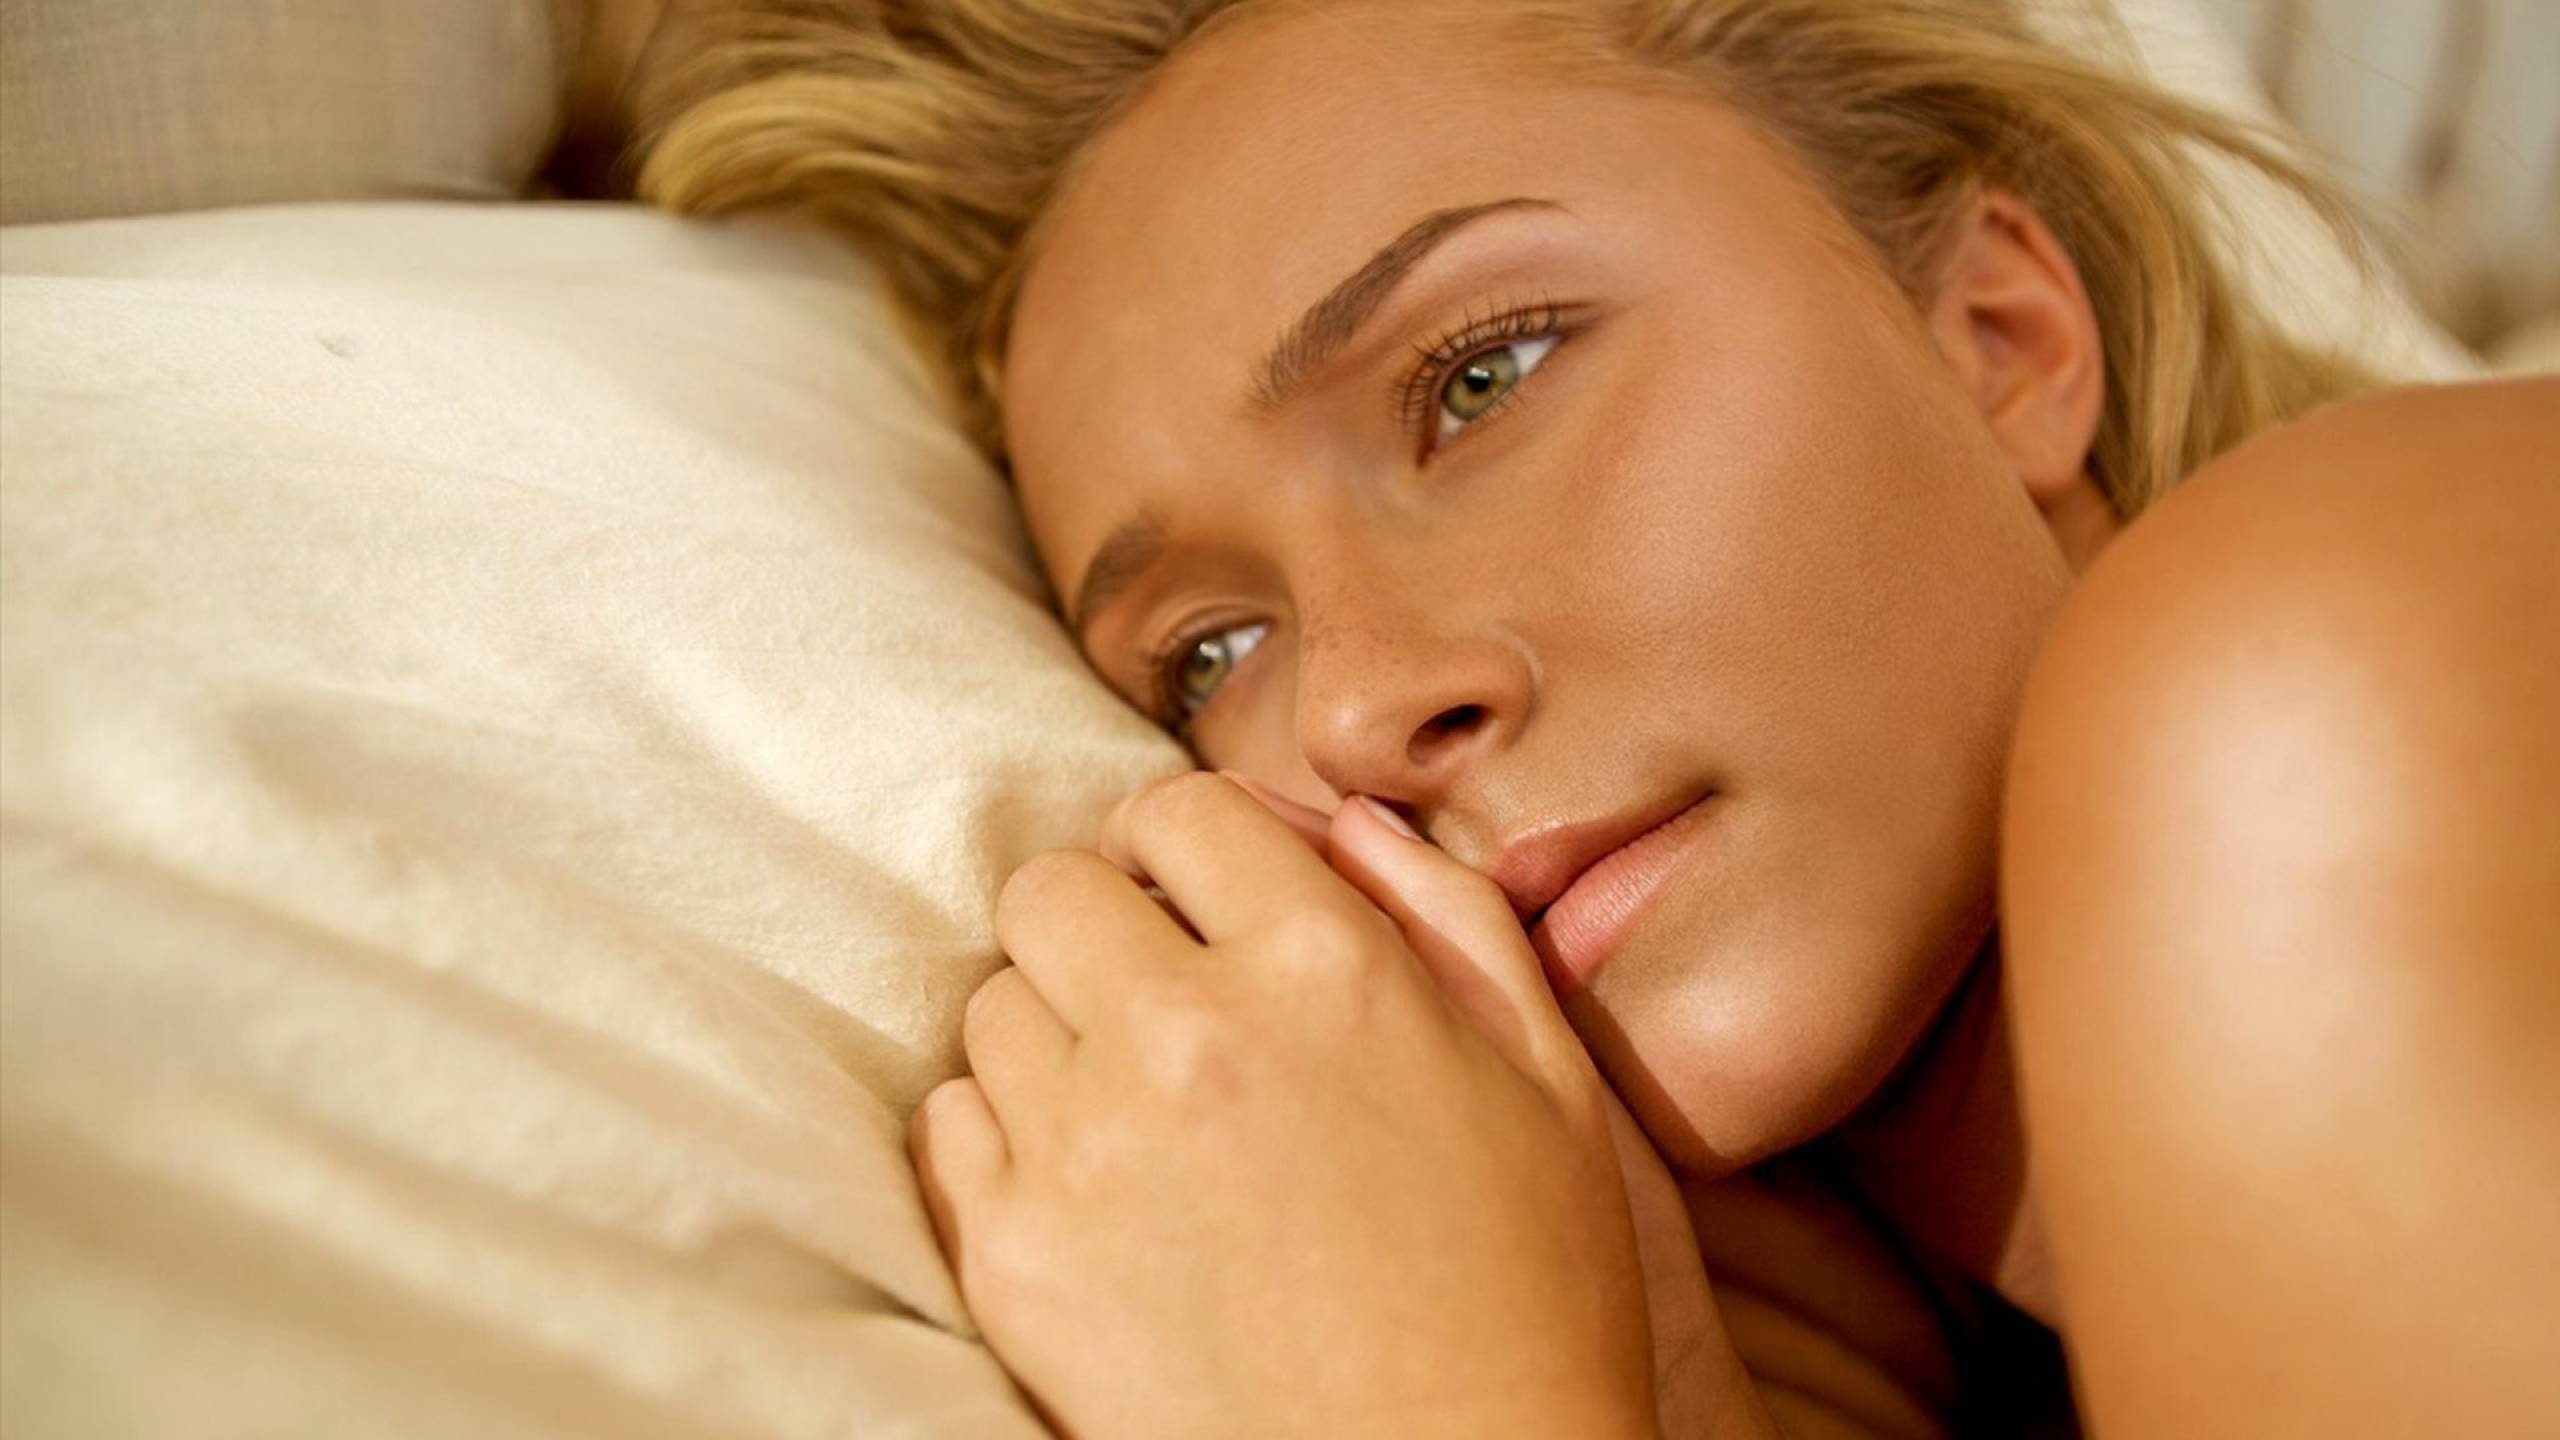 Hayden Panettiere in Bed for 2560x1440 HDTV resolution